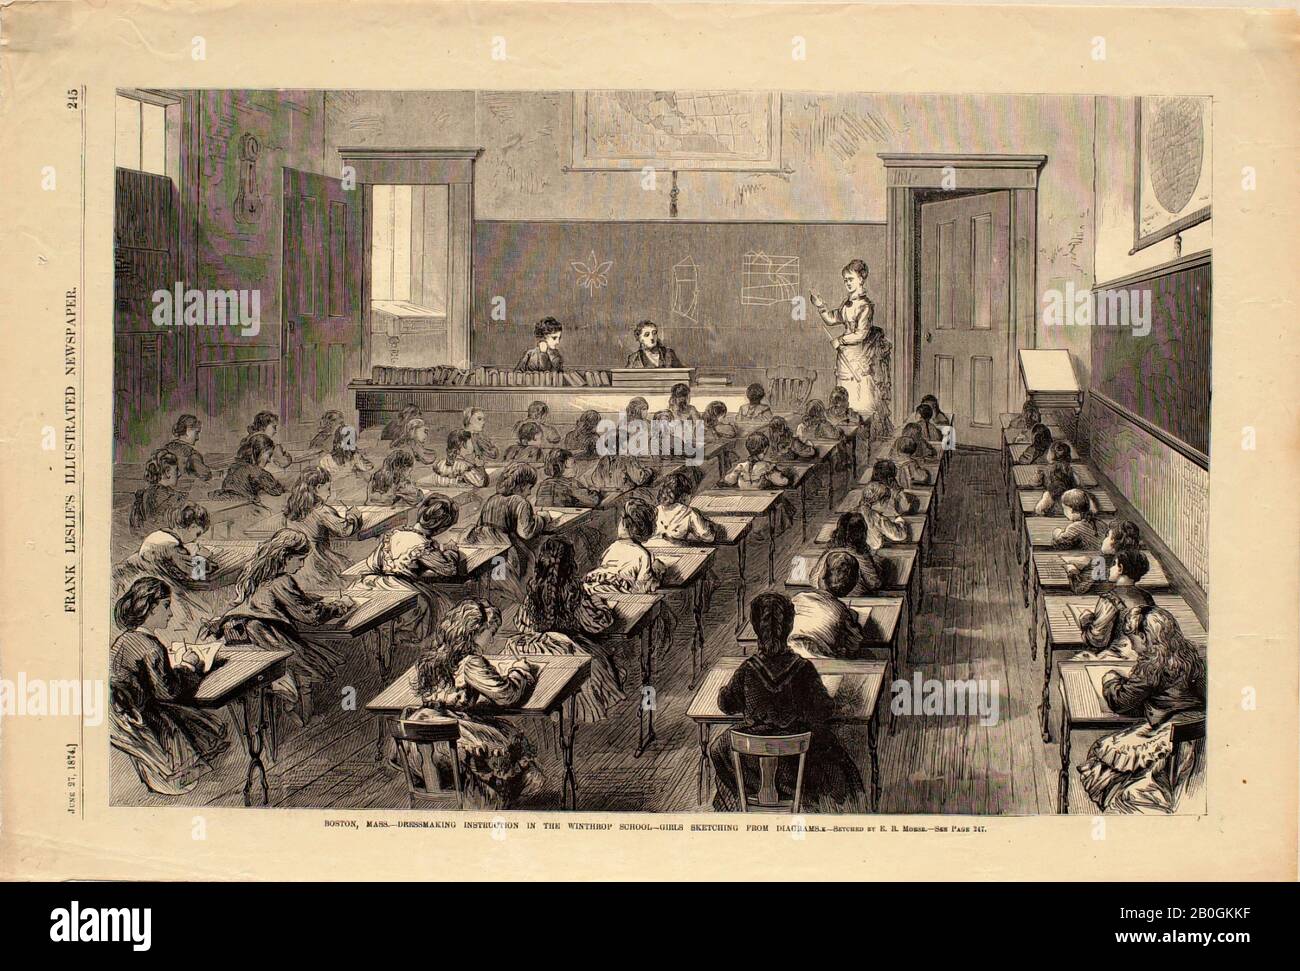 E. R. Morse, américain, XIXe siècle, Boston, Mass.—Dressmaking instruction in the Winthrop School—Girls Sketching from Diagrams, De Frank Leslie's Illustrated Newspaper, 1874, Wood gravage on paper, image: 9 1/8 x 13 7/8 in. (23,1 x 35,3 cm Banque D'Images